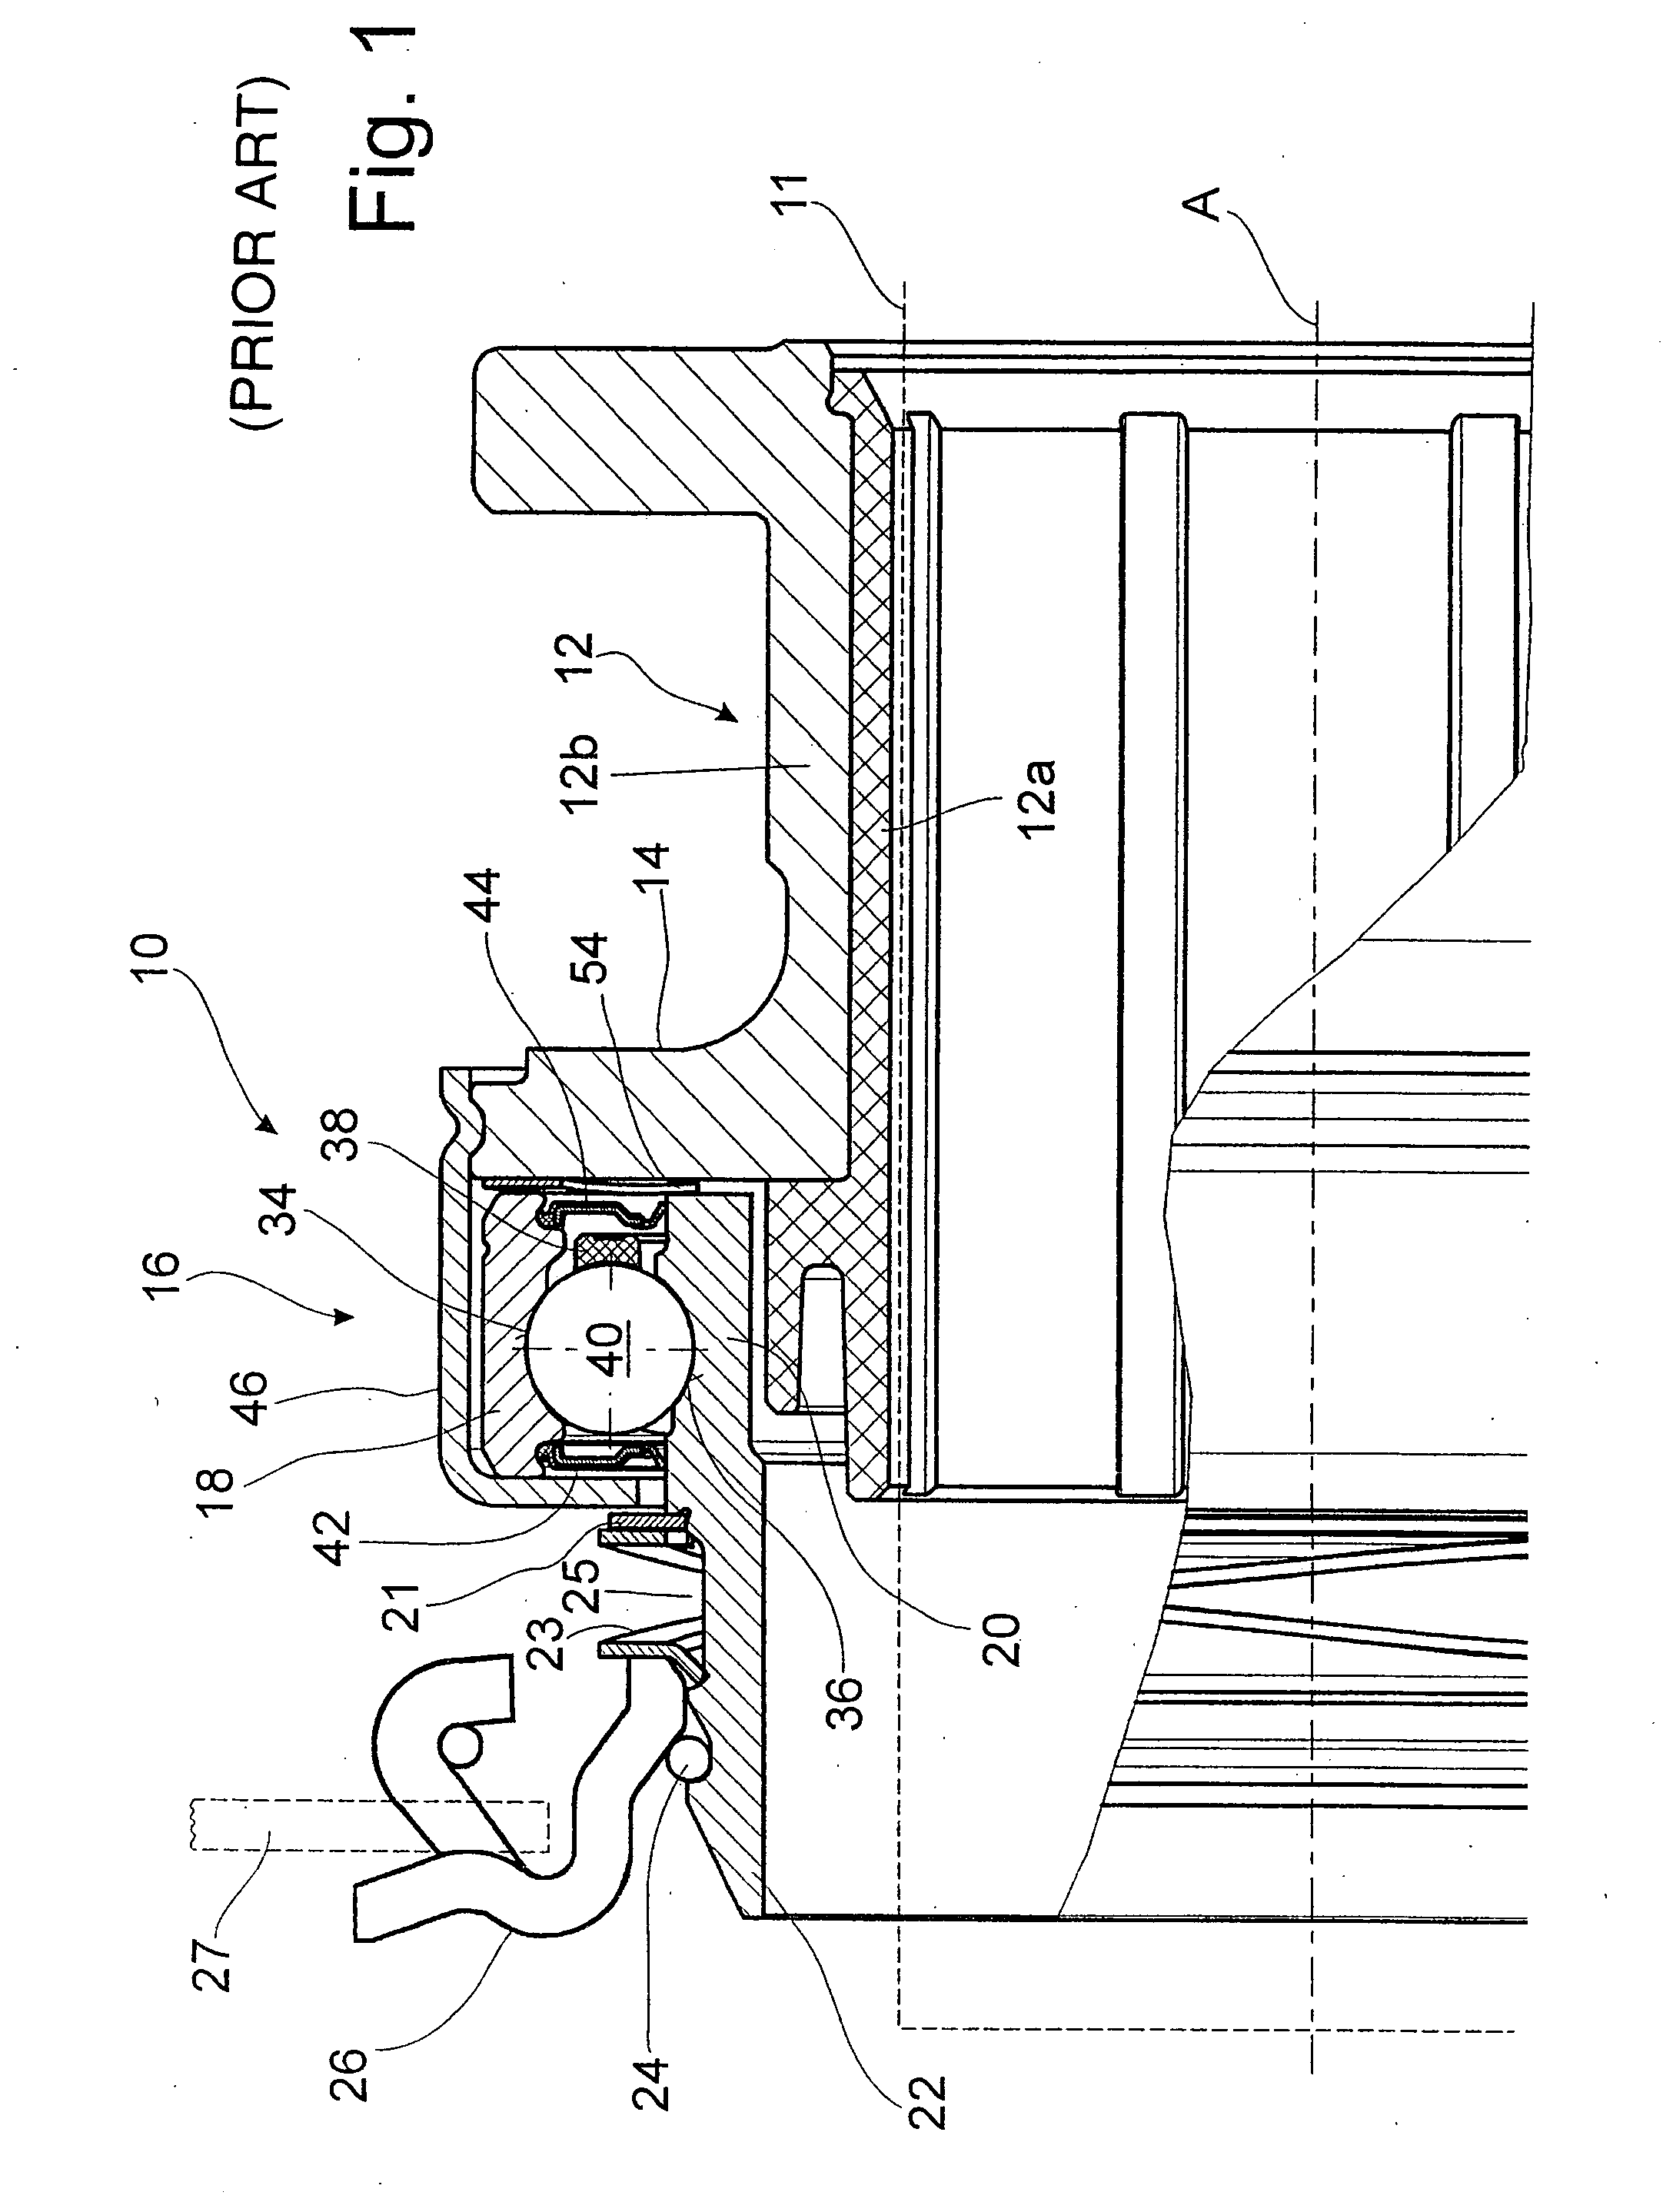 Clutch release device for a friction clutch of a motor vehicle with a fail-safe system